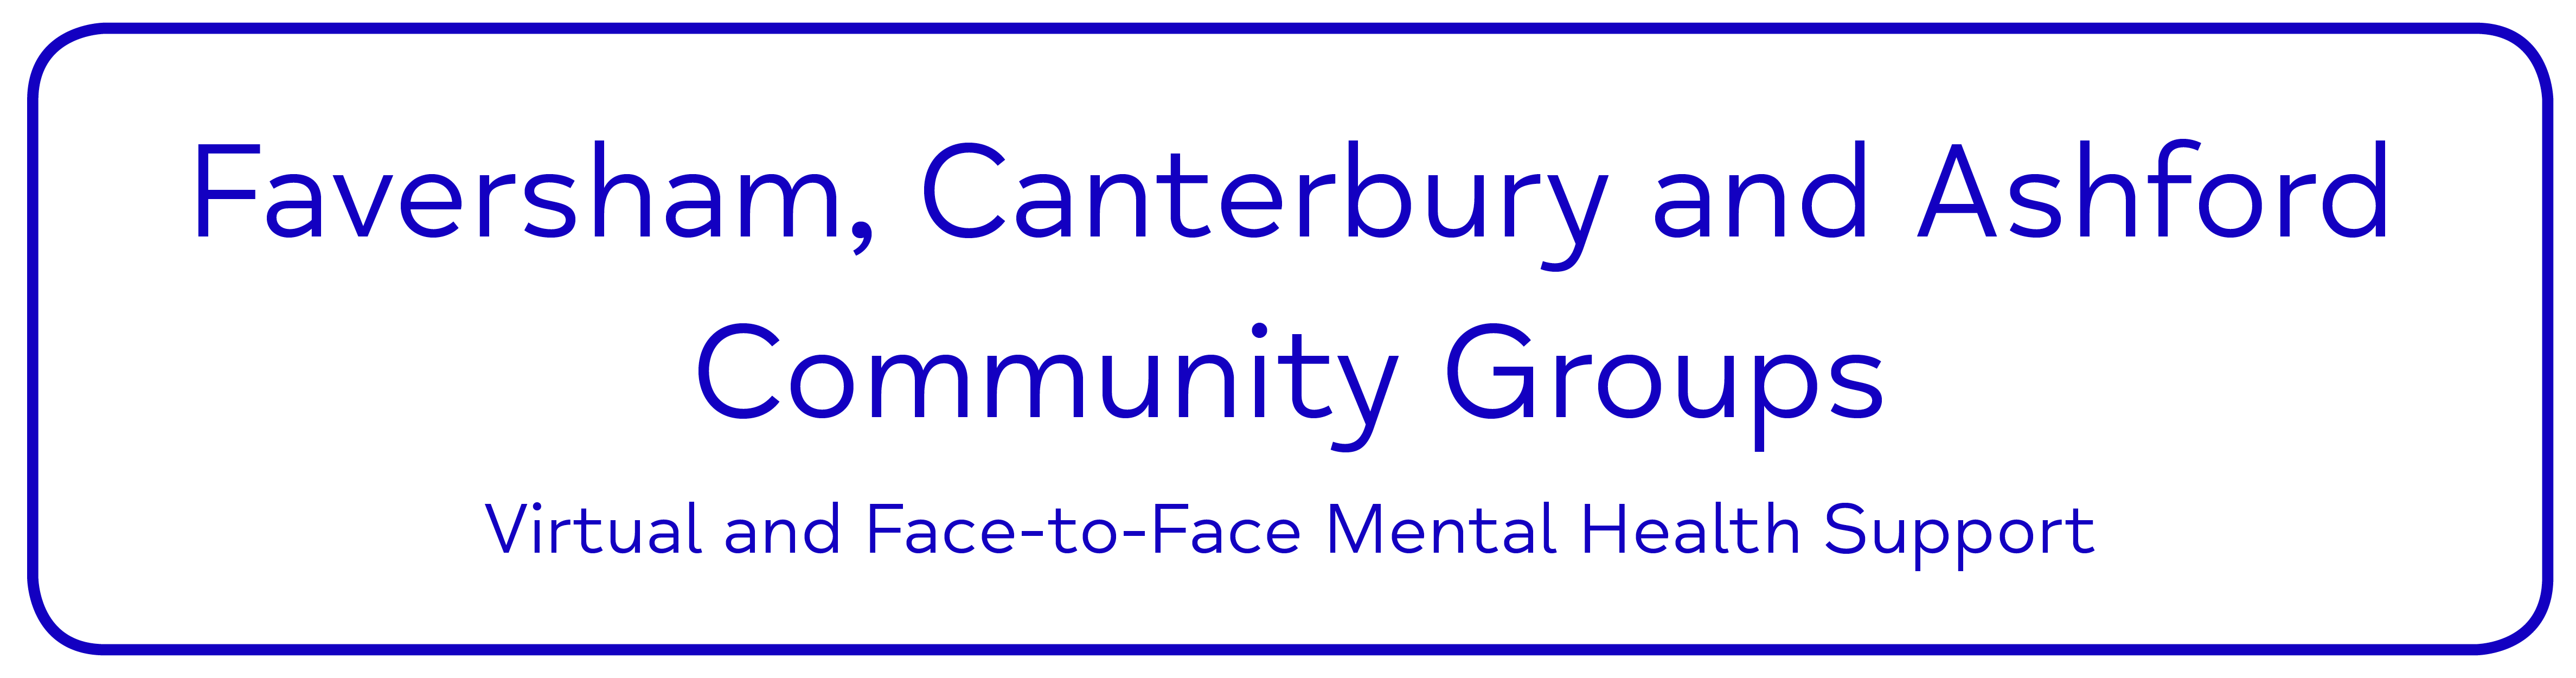 Faversham, Canterbury and Ashford Community Groups. Virtual and Face-to-Face Mental Health Support.